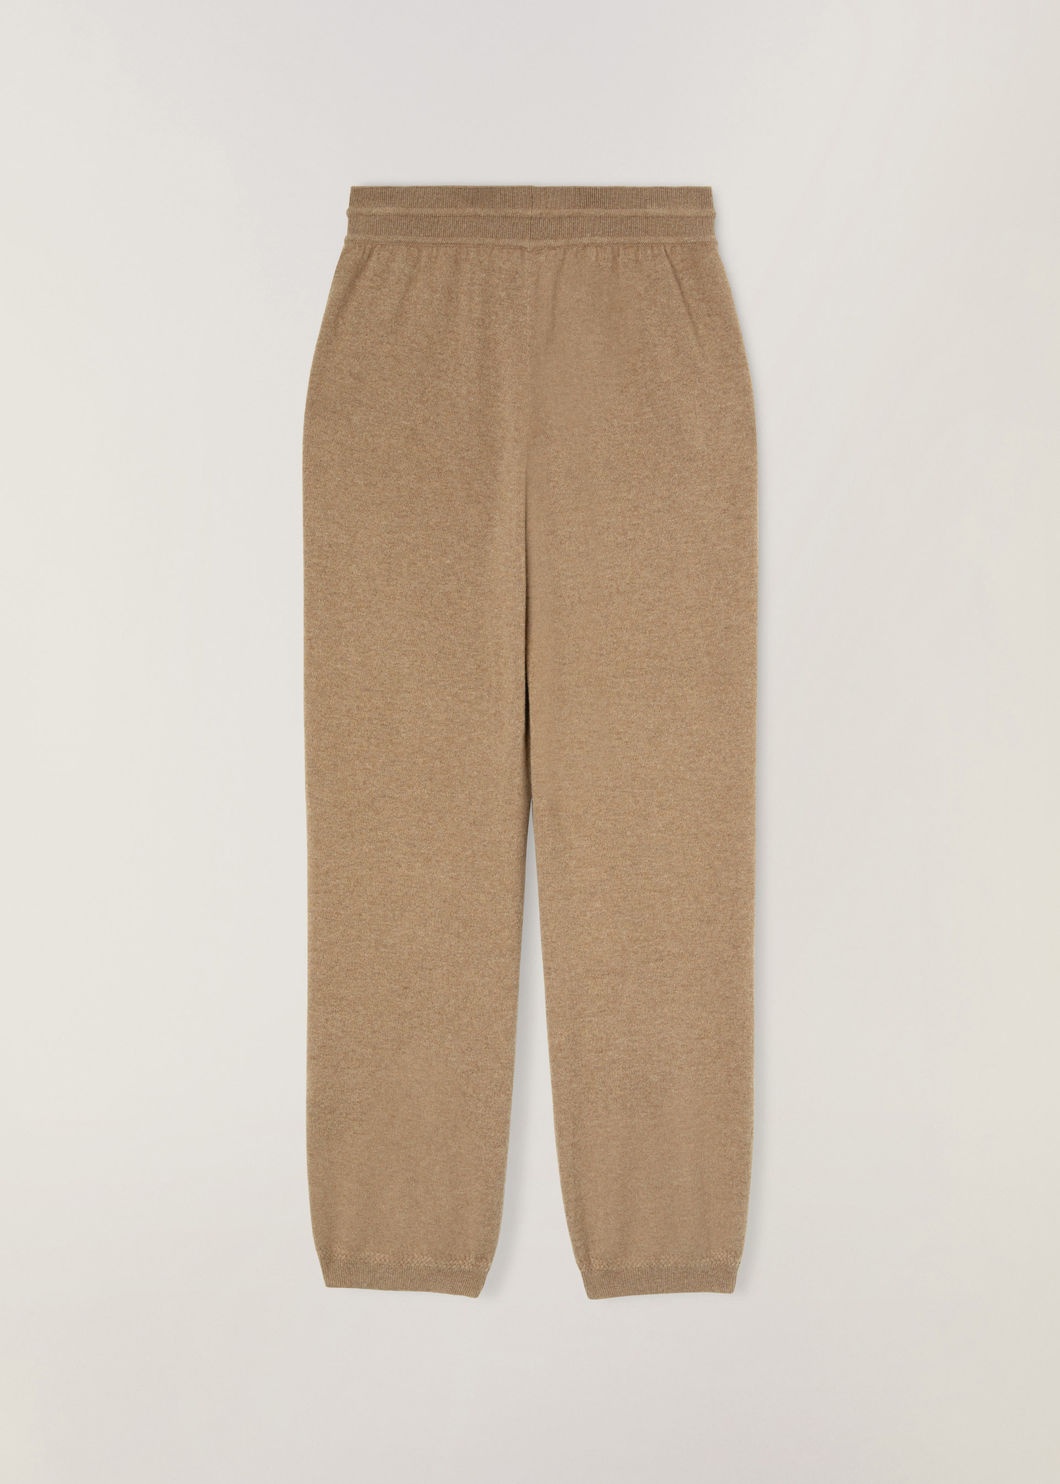 Cocooning Pants - 6